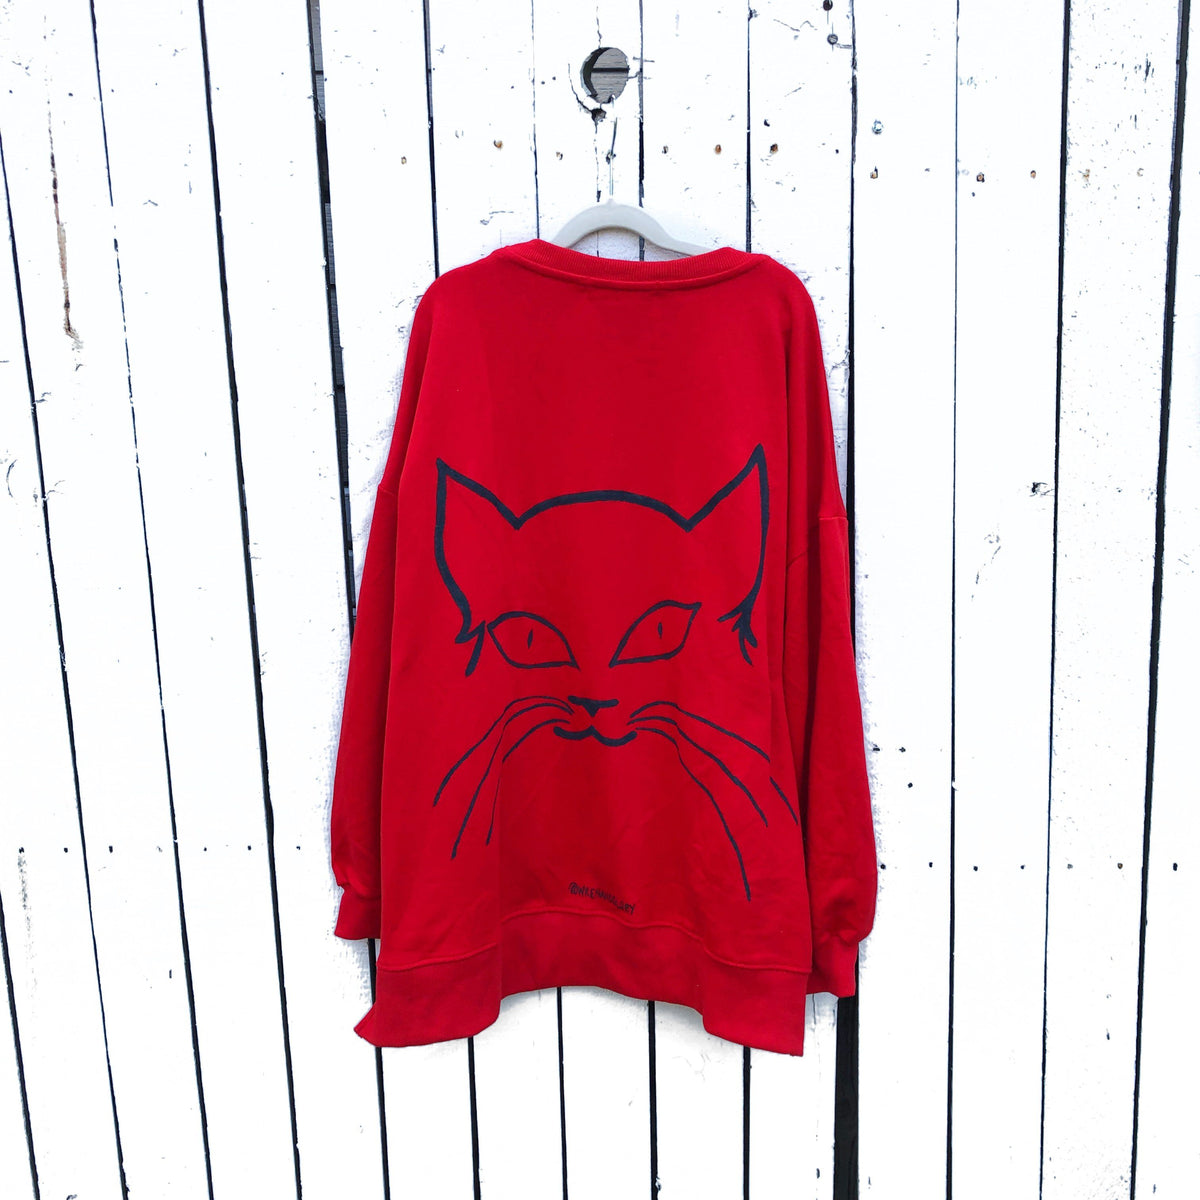 Oversized red sweatshirt. Silhouette of cat painted in black on back, with MEOW painted on front upper side. Signed @wrenandglory.